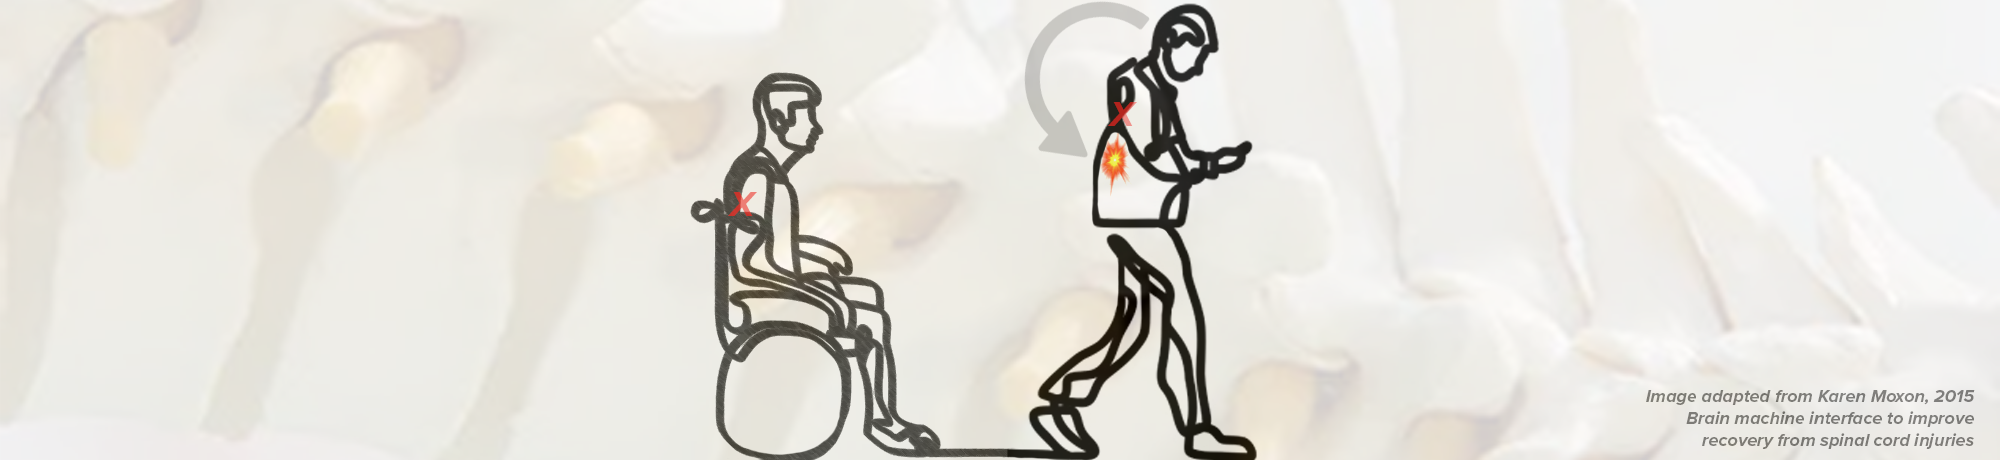 Continuous line drawing of man going from wheel chair to walking following spinal stimulation 